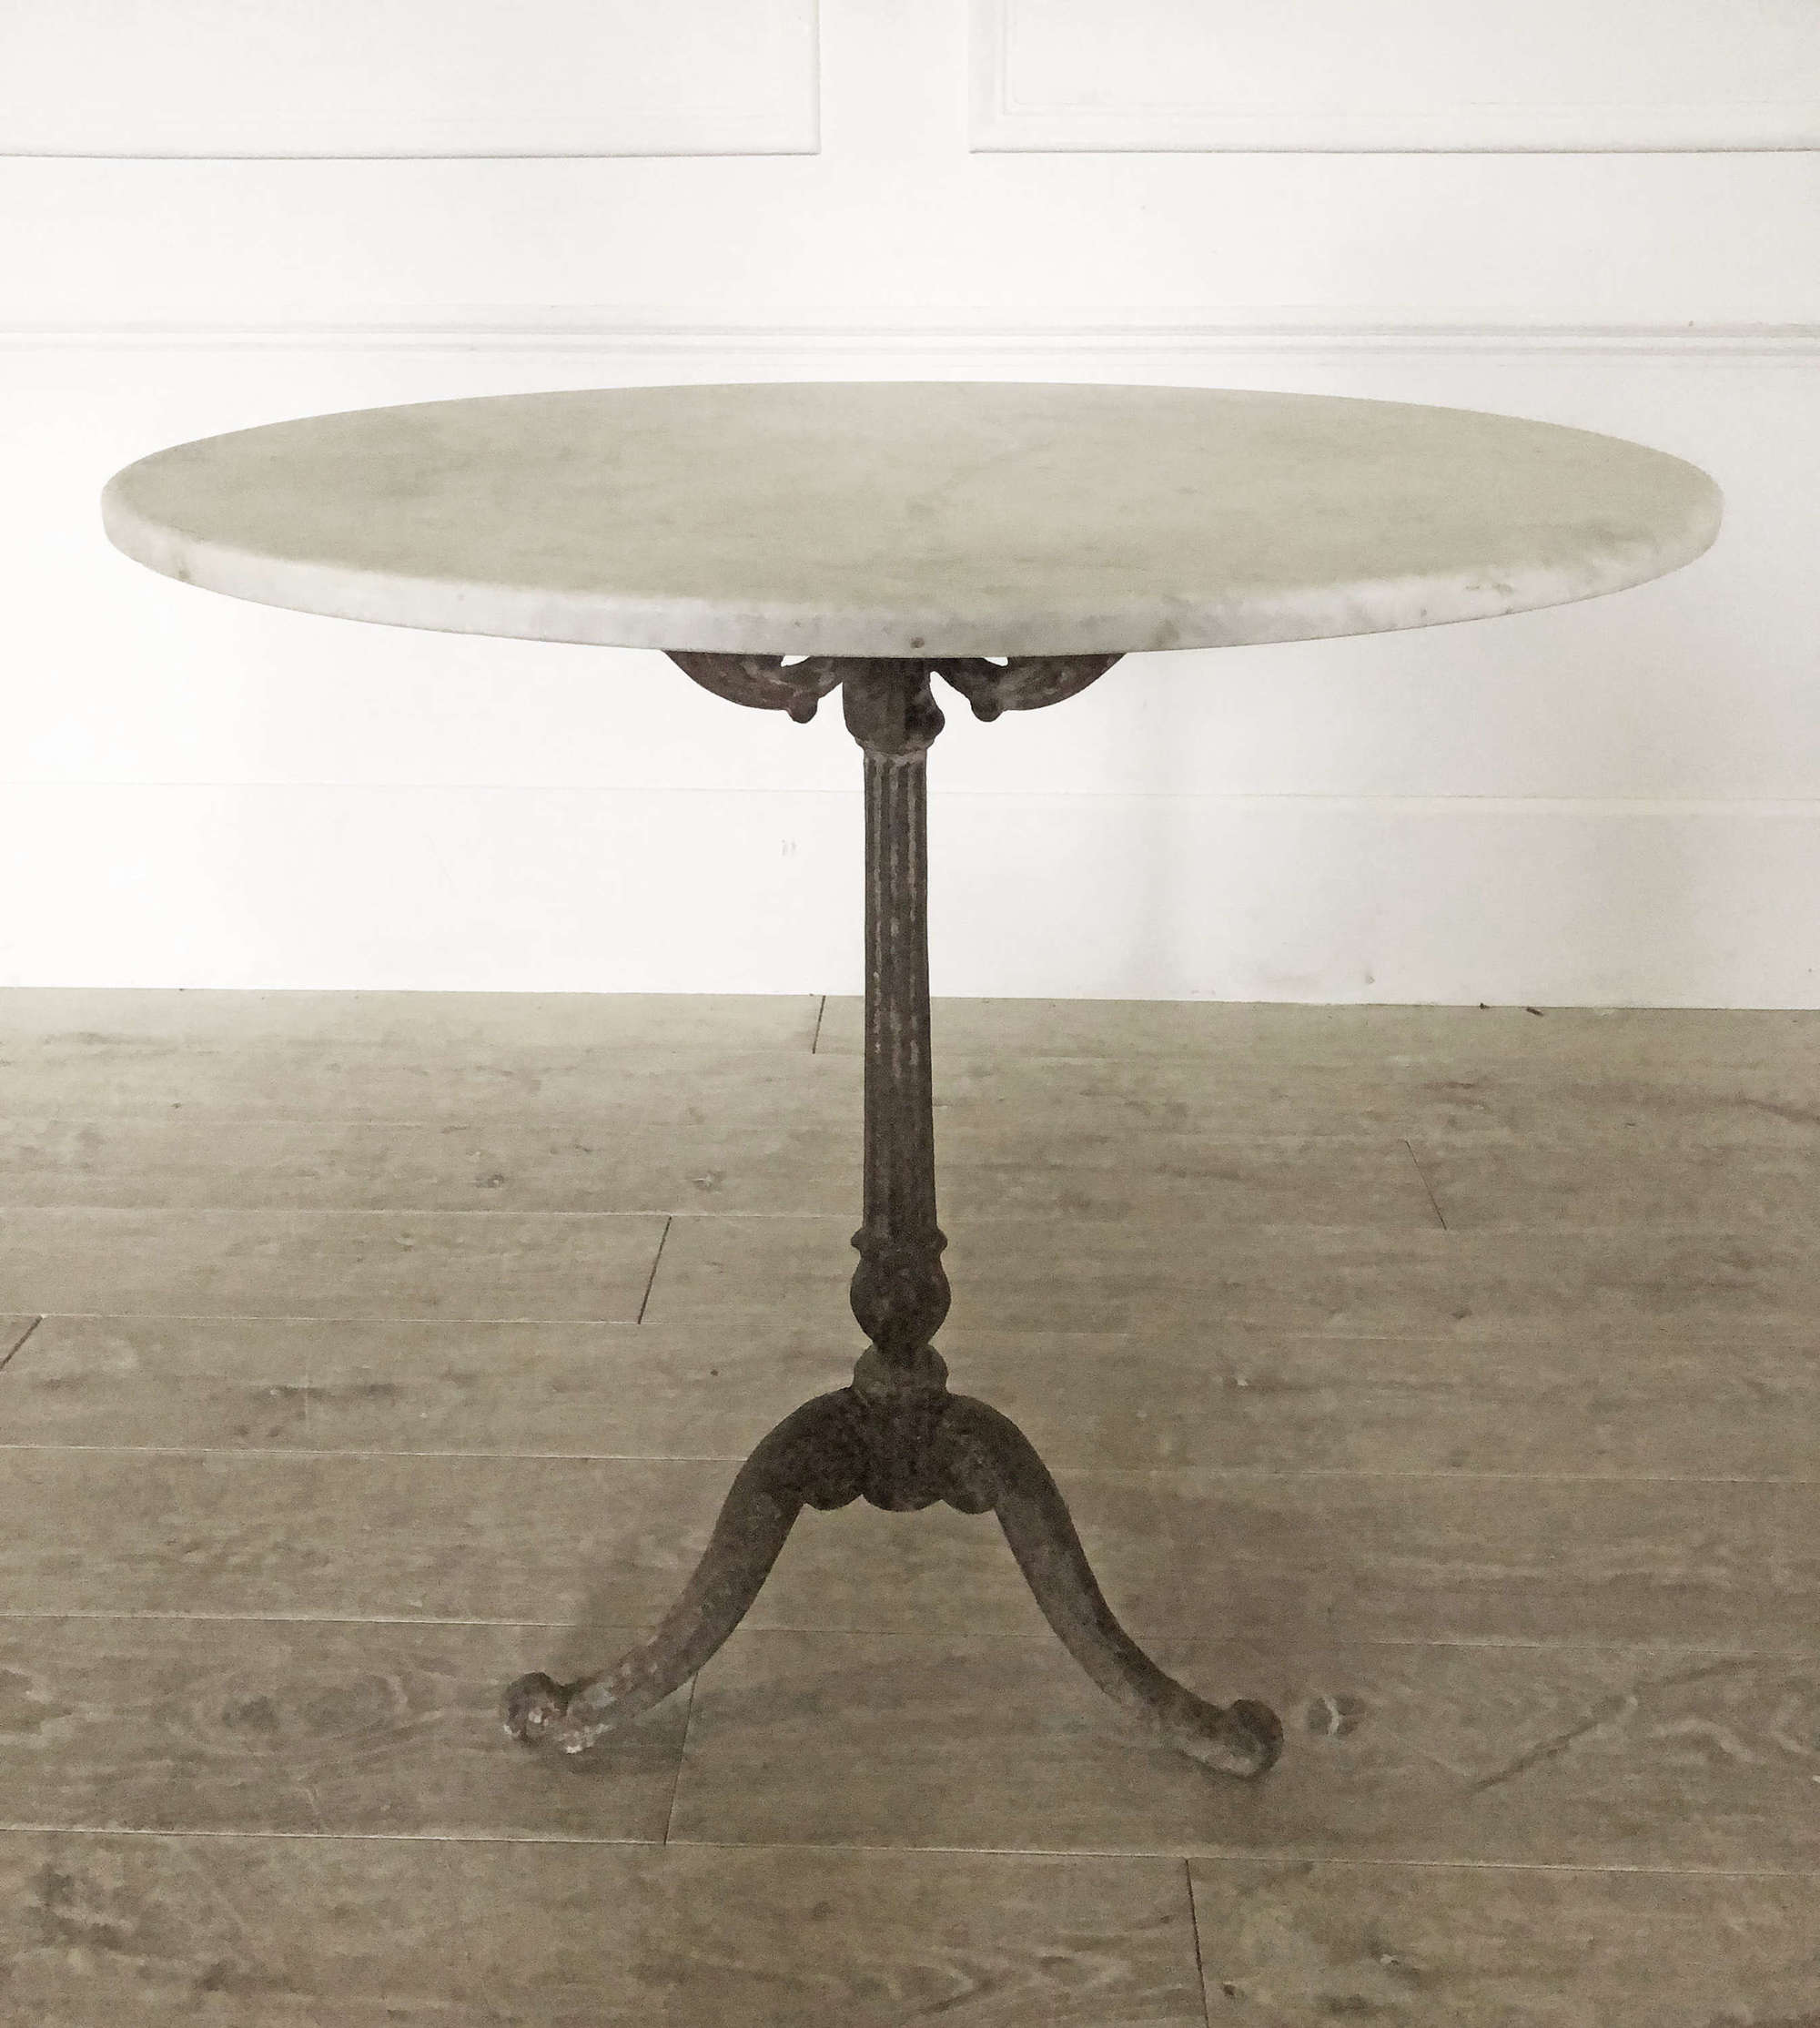 Medium 19th c French Cast Iron Table with Round Marble top - c 1880